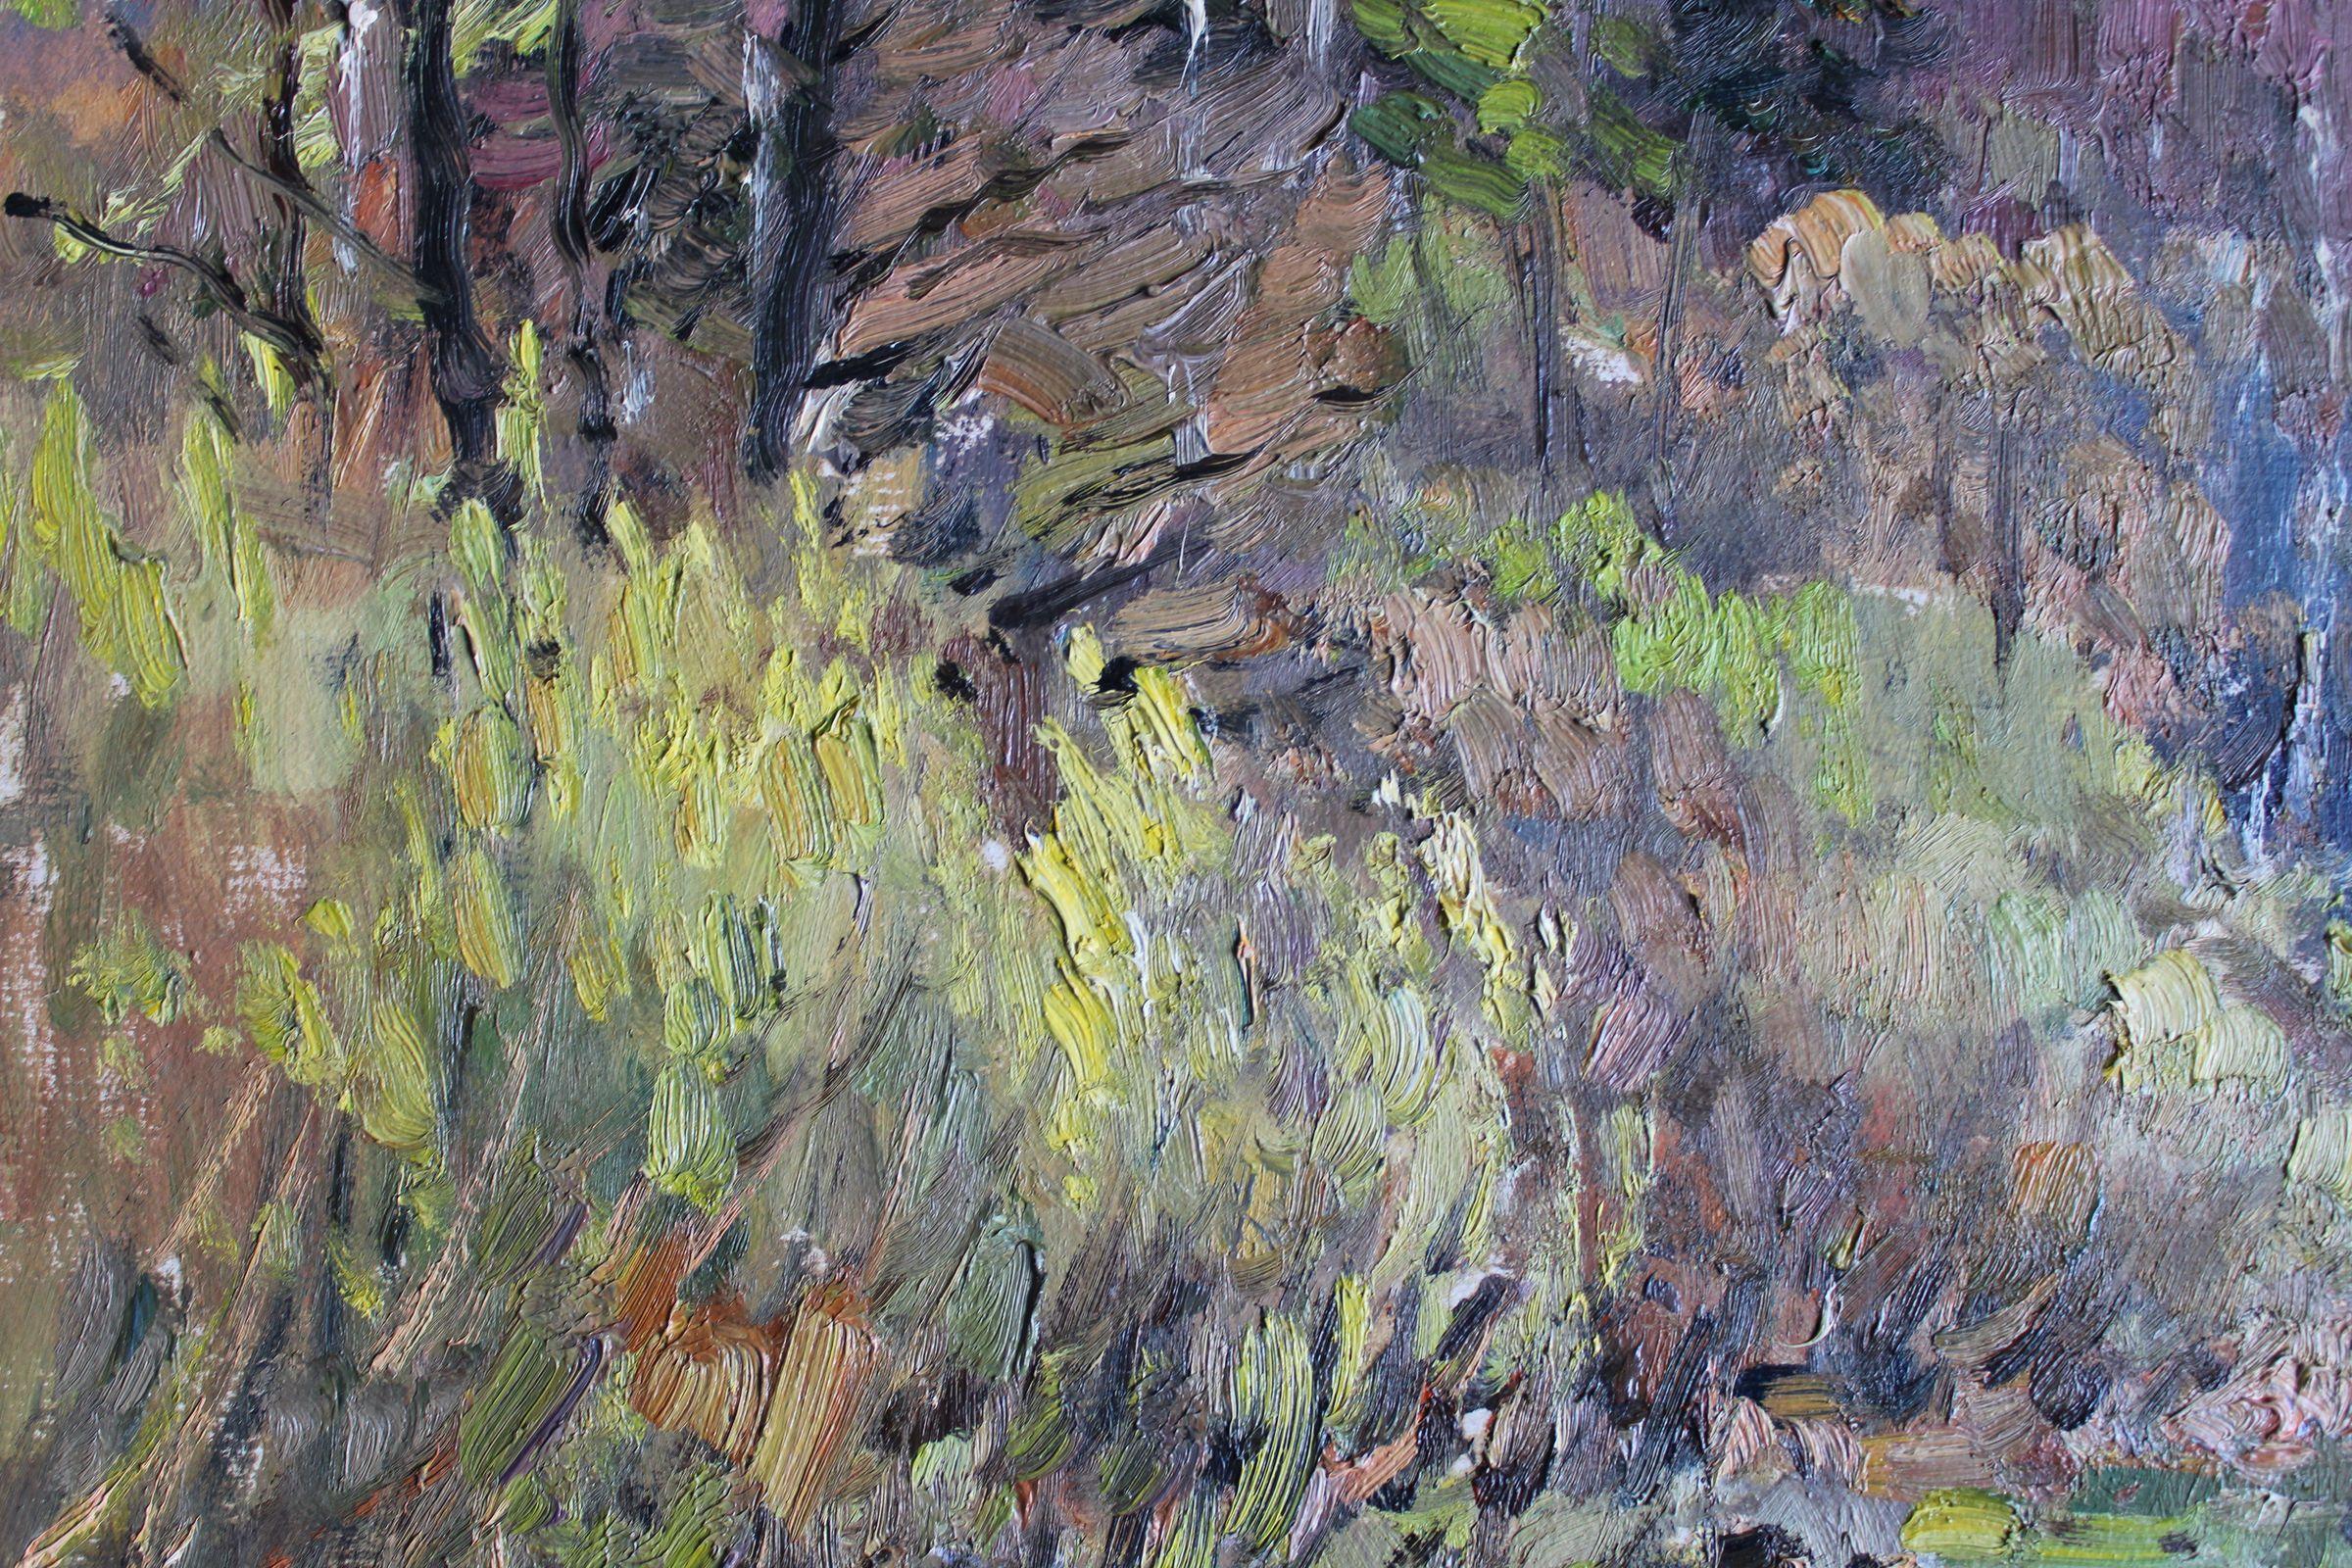 Forest river. 1990. Cardboard, oil. 67,5x93 cm

Information about artist Edgars Vinters (1919-2014).
Edgars Vinters was working in oil, watercolor and monotype techniques. He painted landscapes in different seasons and flowers. In 1970 the